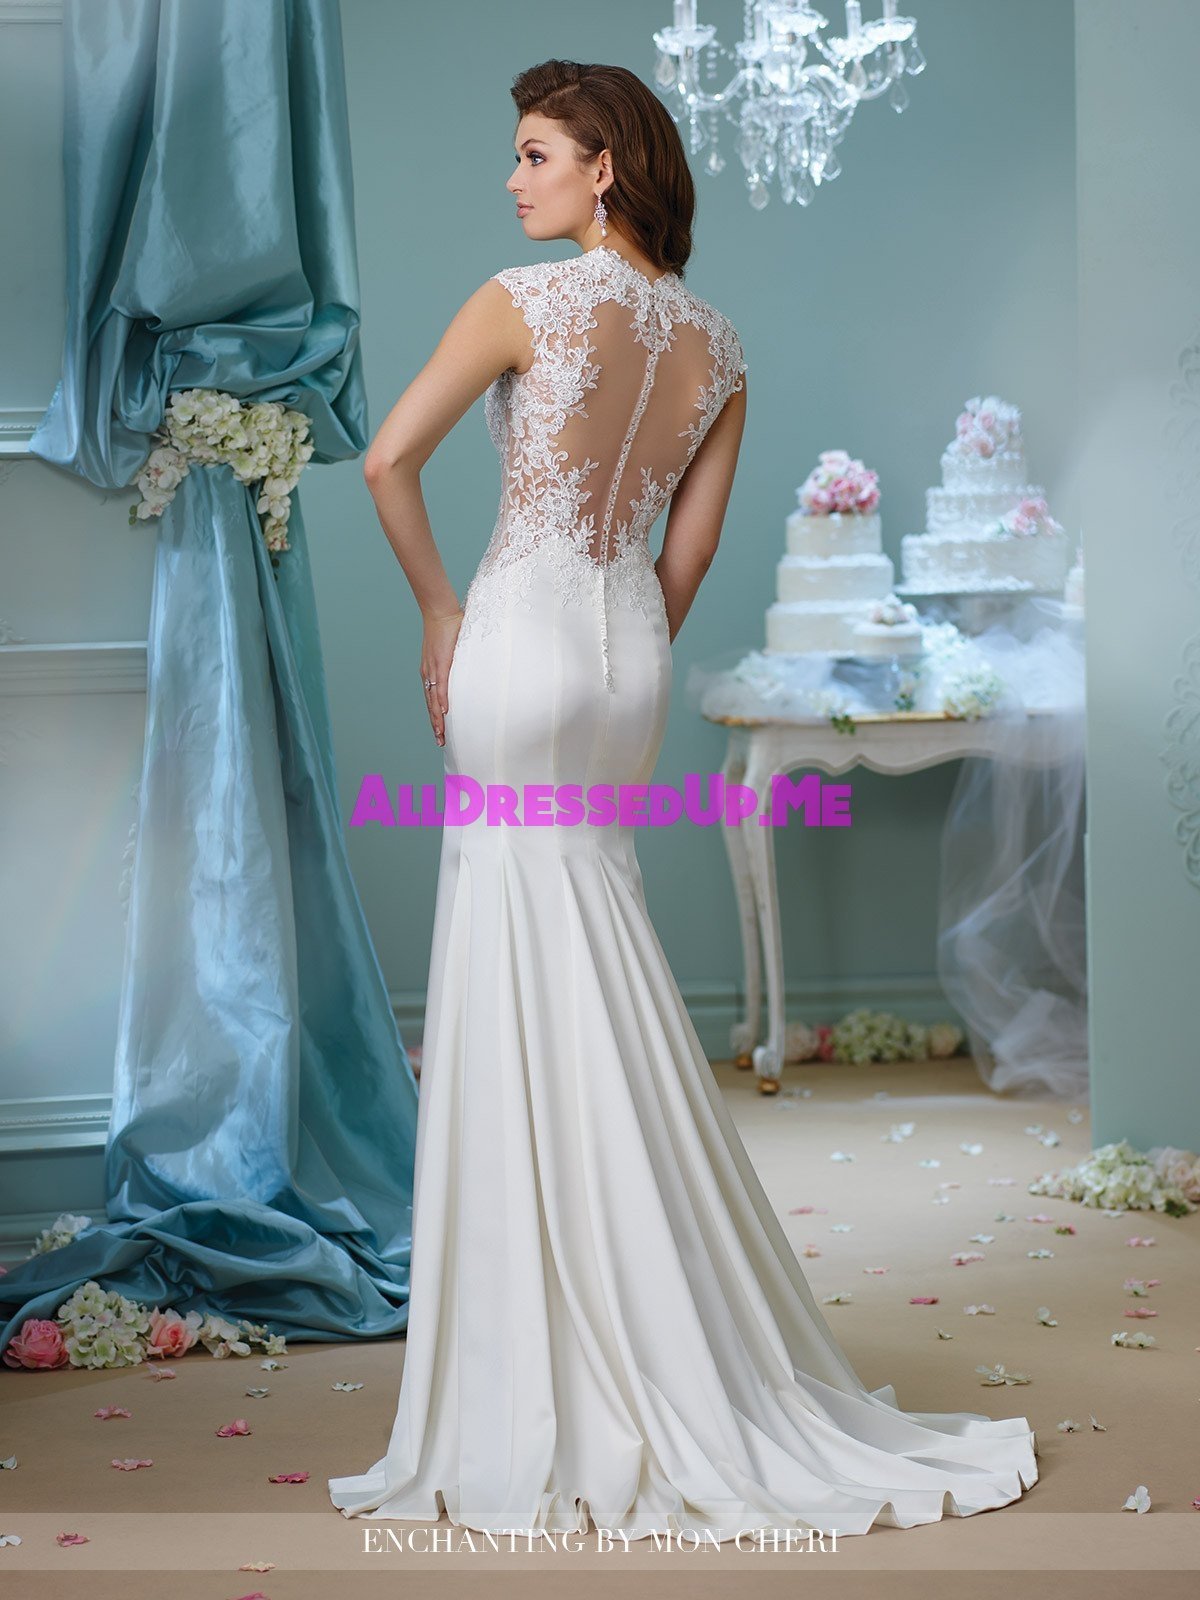 Enchanting 216158 All Dressed Up Bridal  Gown  All 